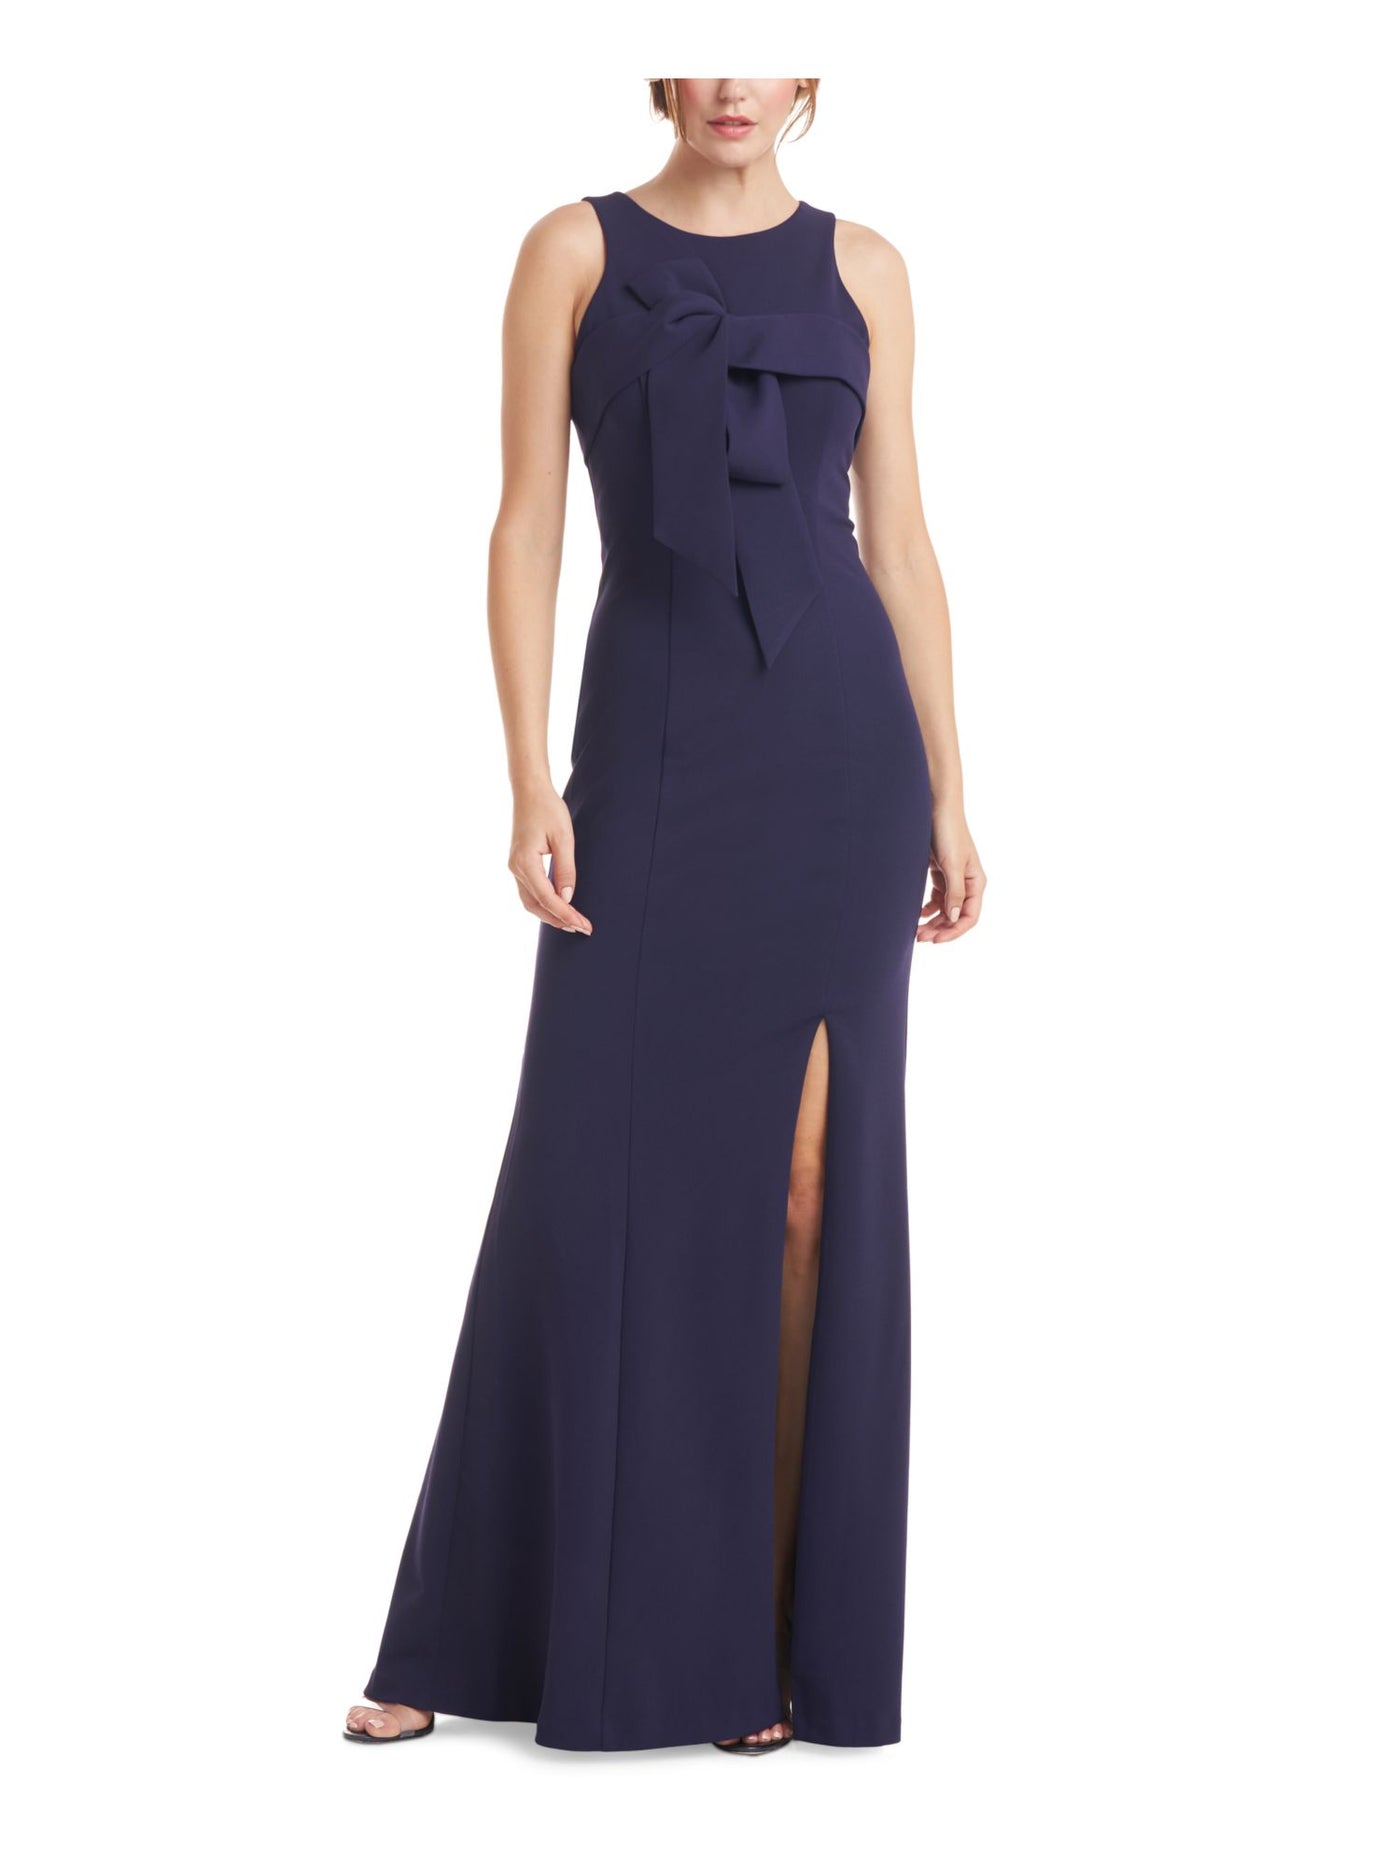 JS COLLECTION Womens Navy Stretch Slitted Zippered Bow Detail Lined Sleeveless Jewel Neck Full-Length Formal Gown Dress 4